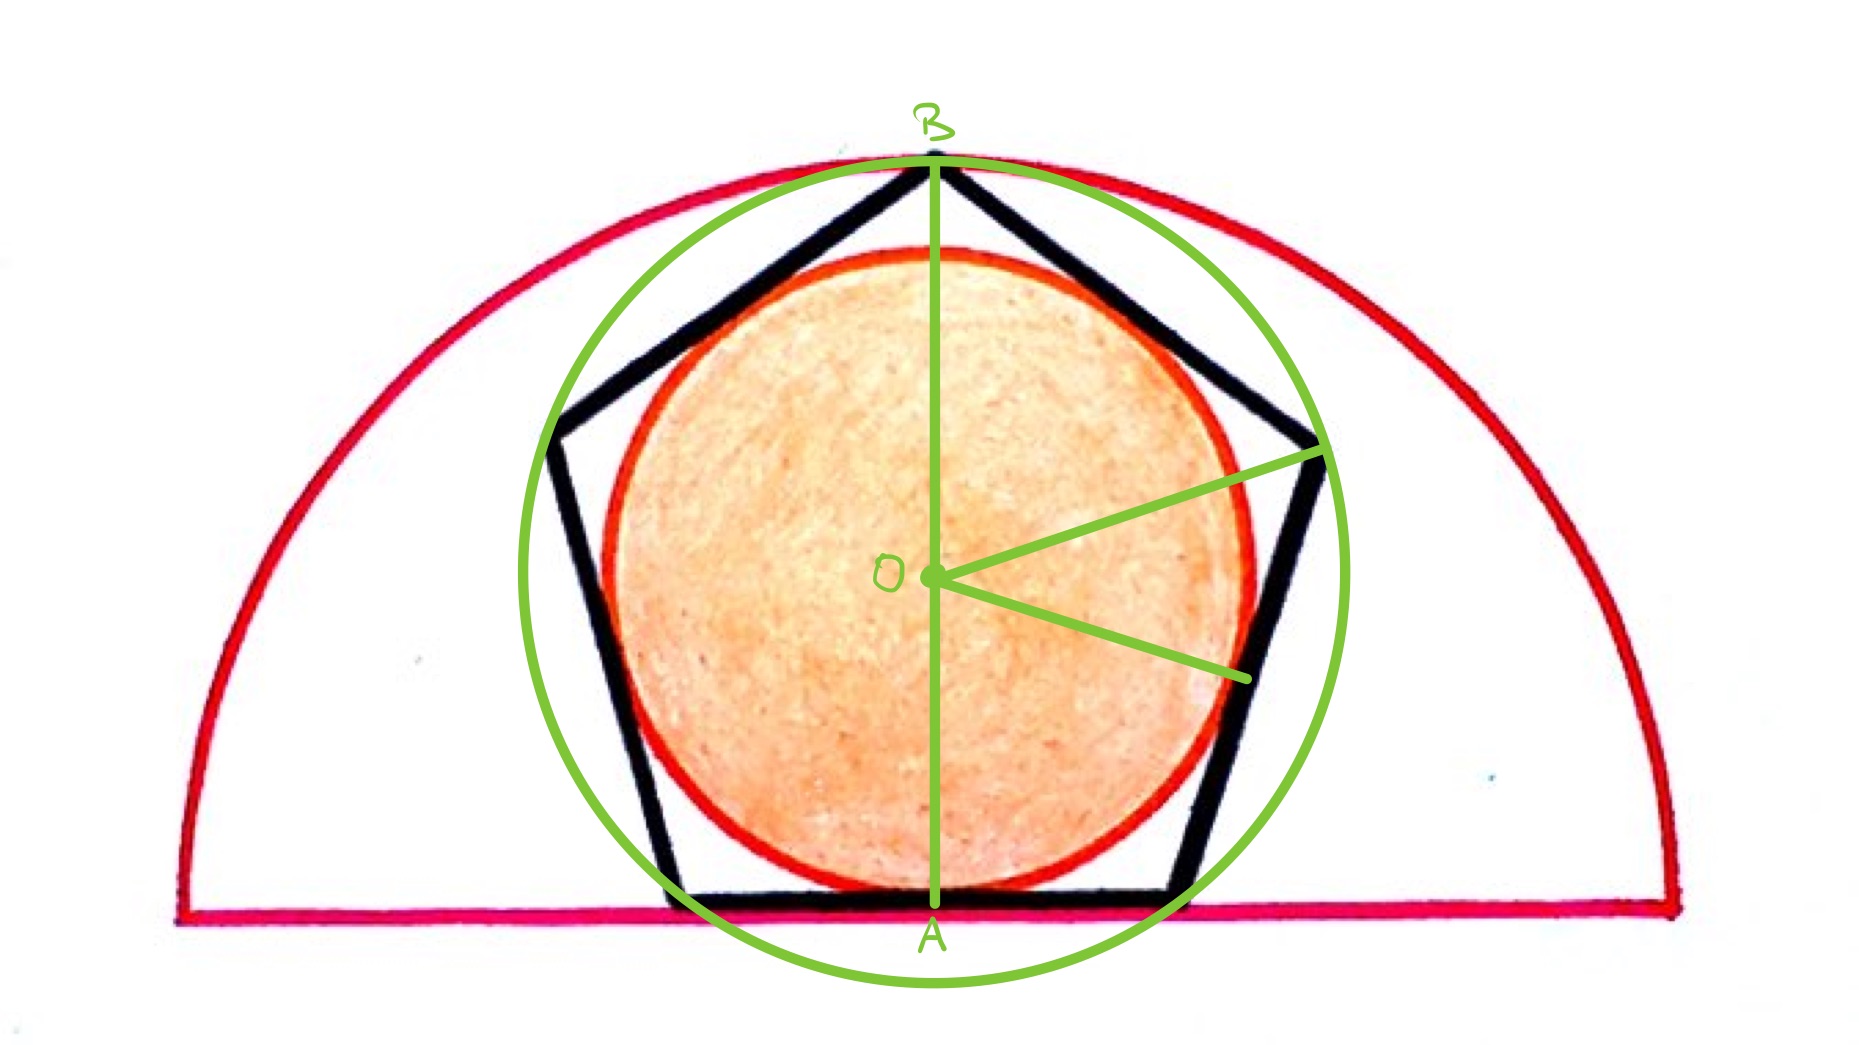 Circle in a pentagon in a semi-circle labelled